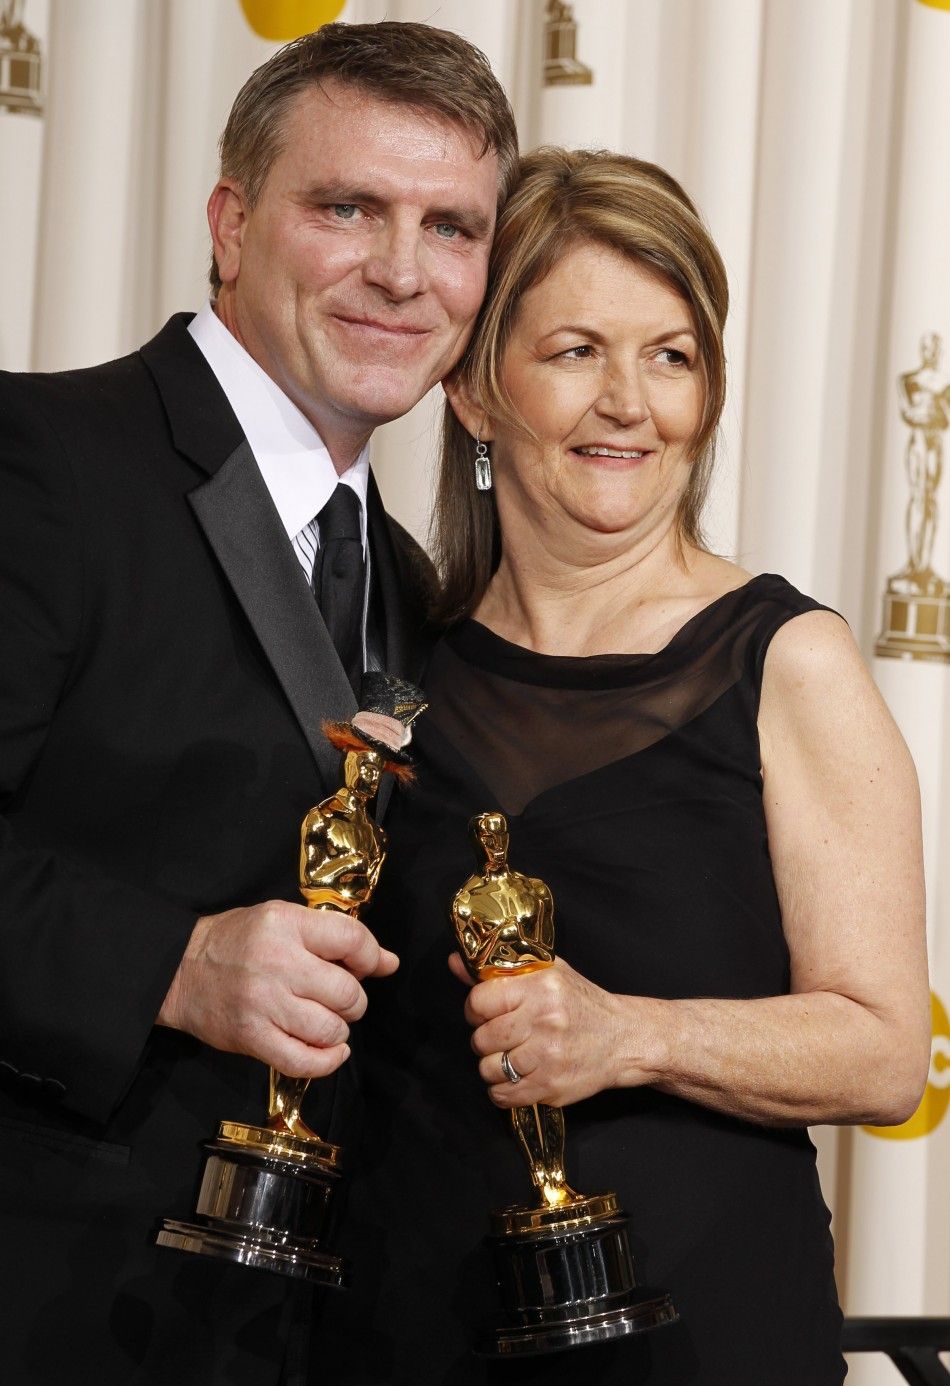 Stromberg and OHara hold their Oscars for Achievement in Art Direction for Alice in Wonderland as they pose backstage at the 83rd Academy Awards in Hollywood